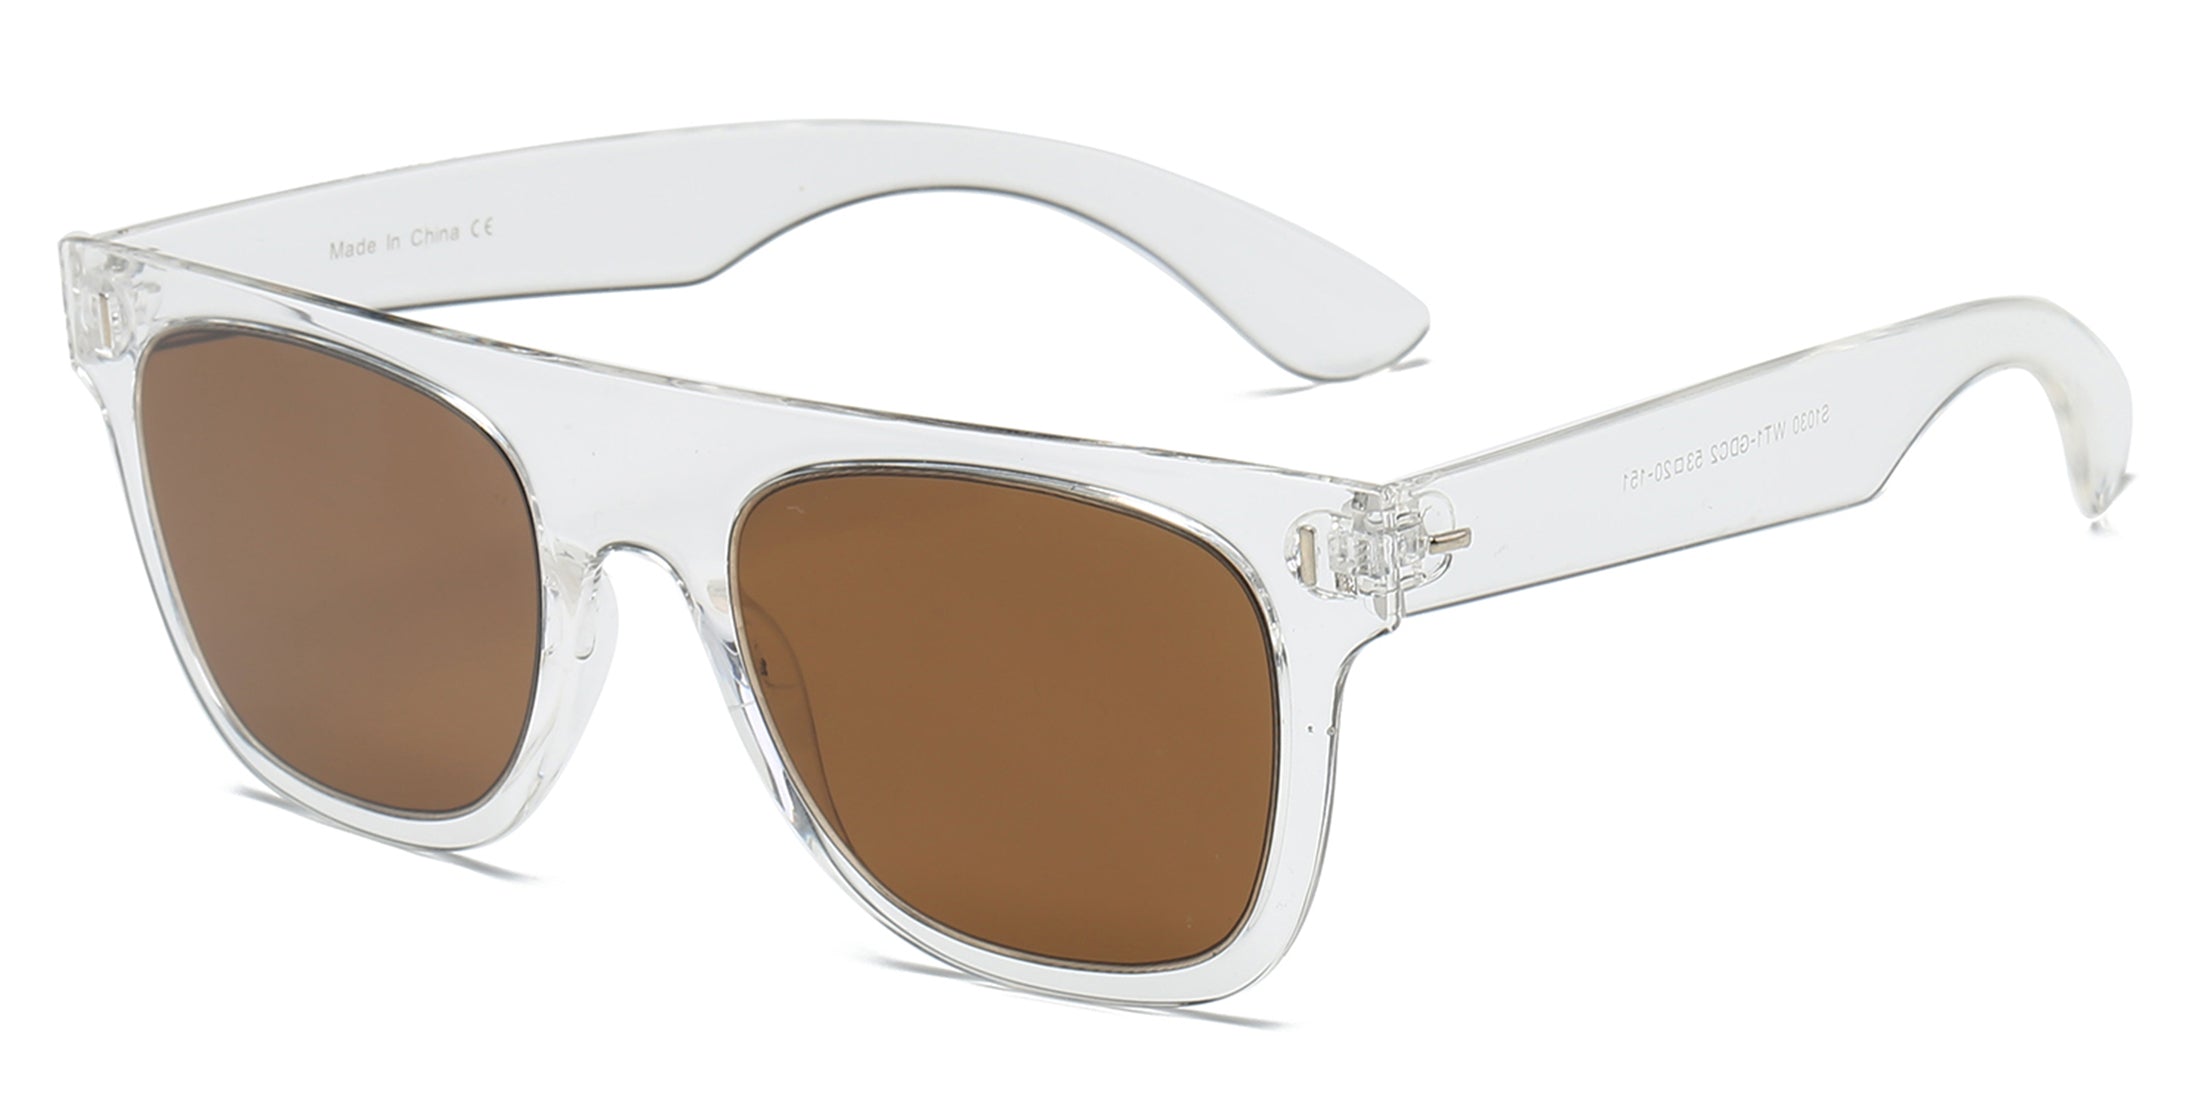 S1030 - Classic Square Mirrored Lens SUNGLASSES Clear/Brown